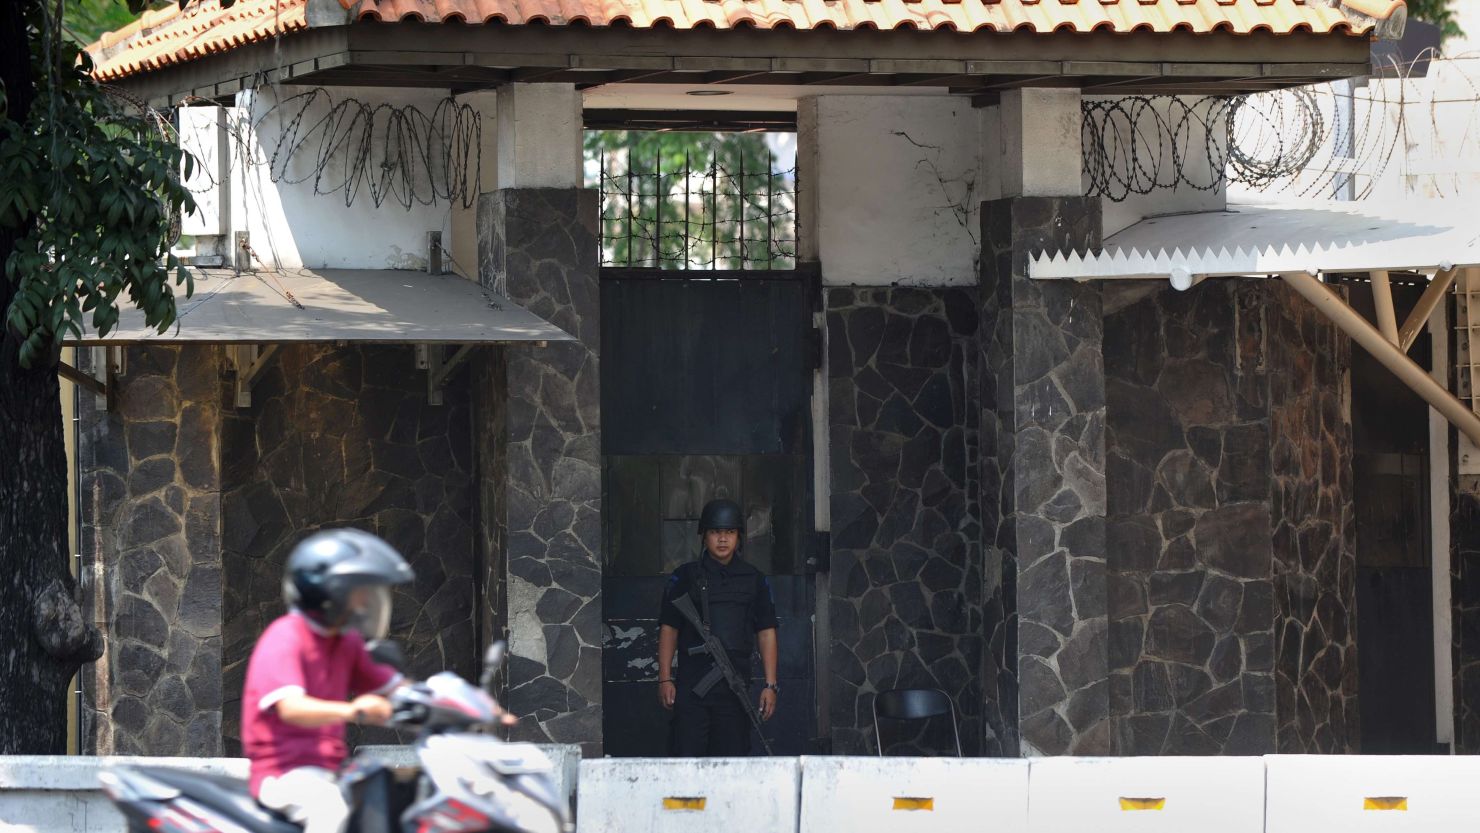 An Indonesian policeman outside the US embassy in Jakarta on August 4, 2013. Interpol issued a global security alert after jailbreaks linked to Al-Qaeda freed hundreds of militants.